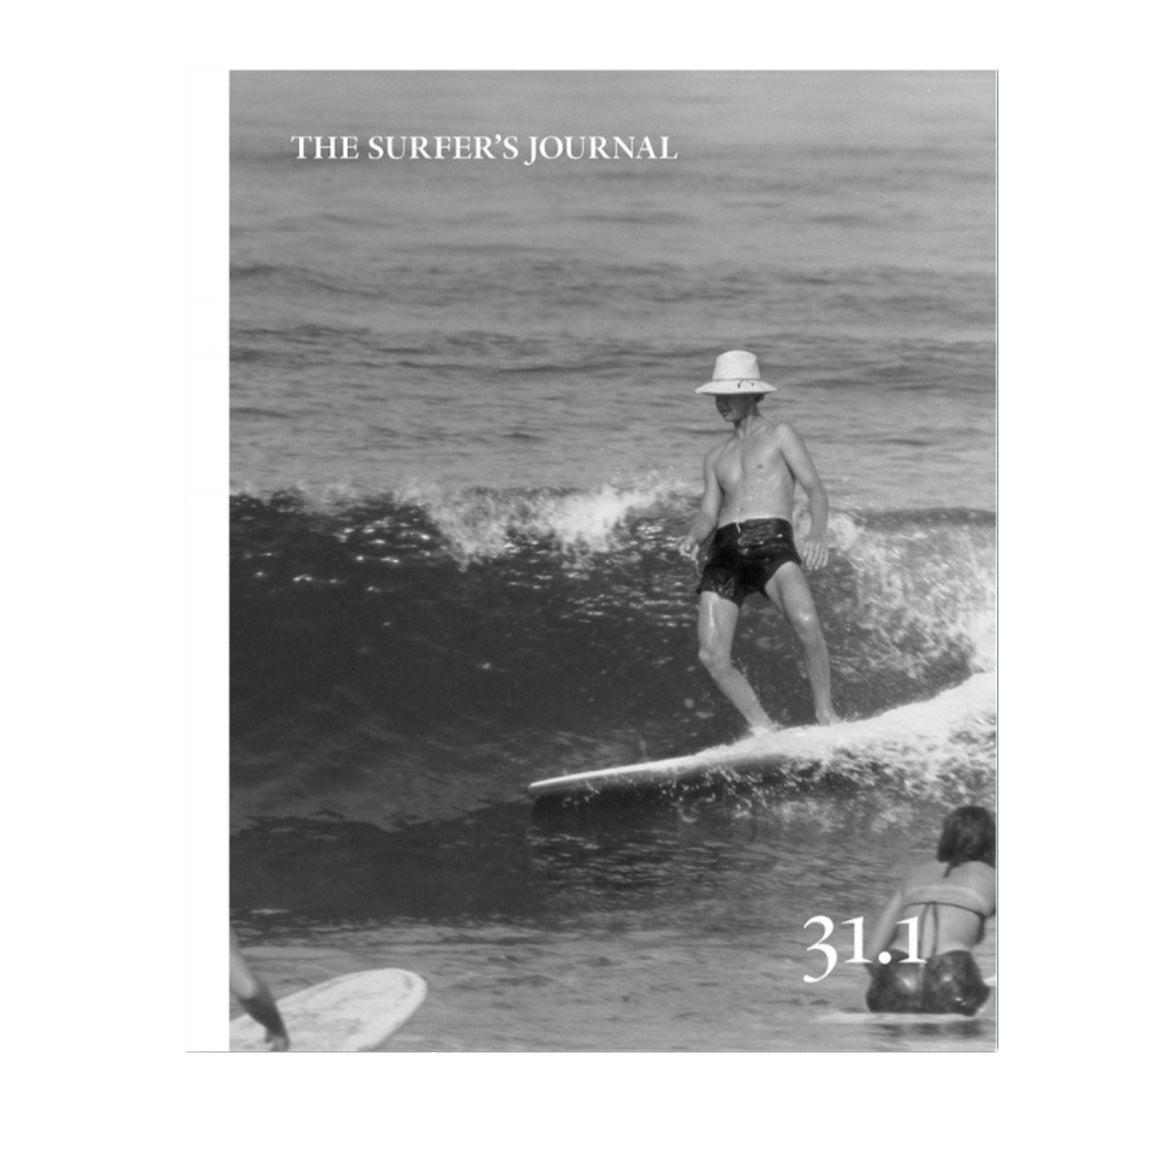 THE SURFER'S JOURNAL - ISSUE 31.1